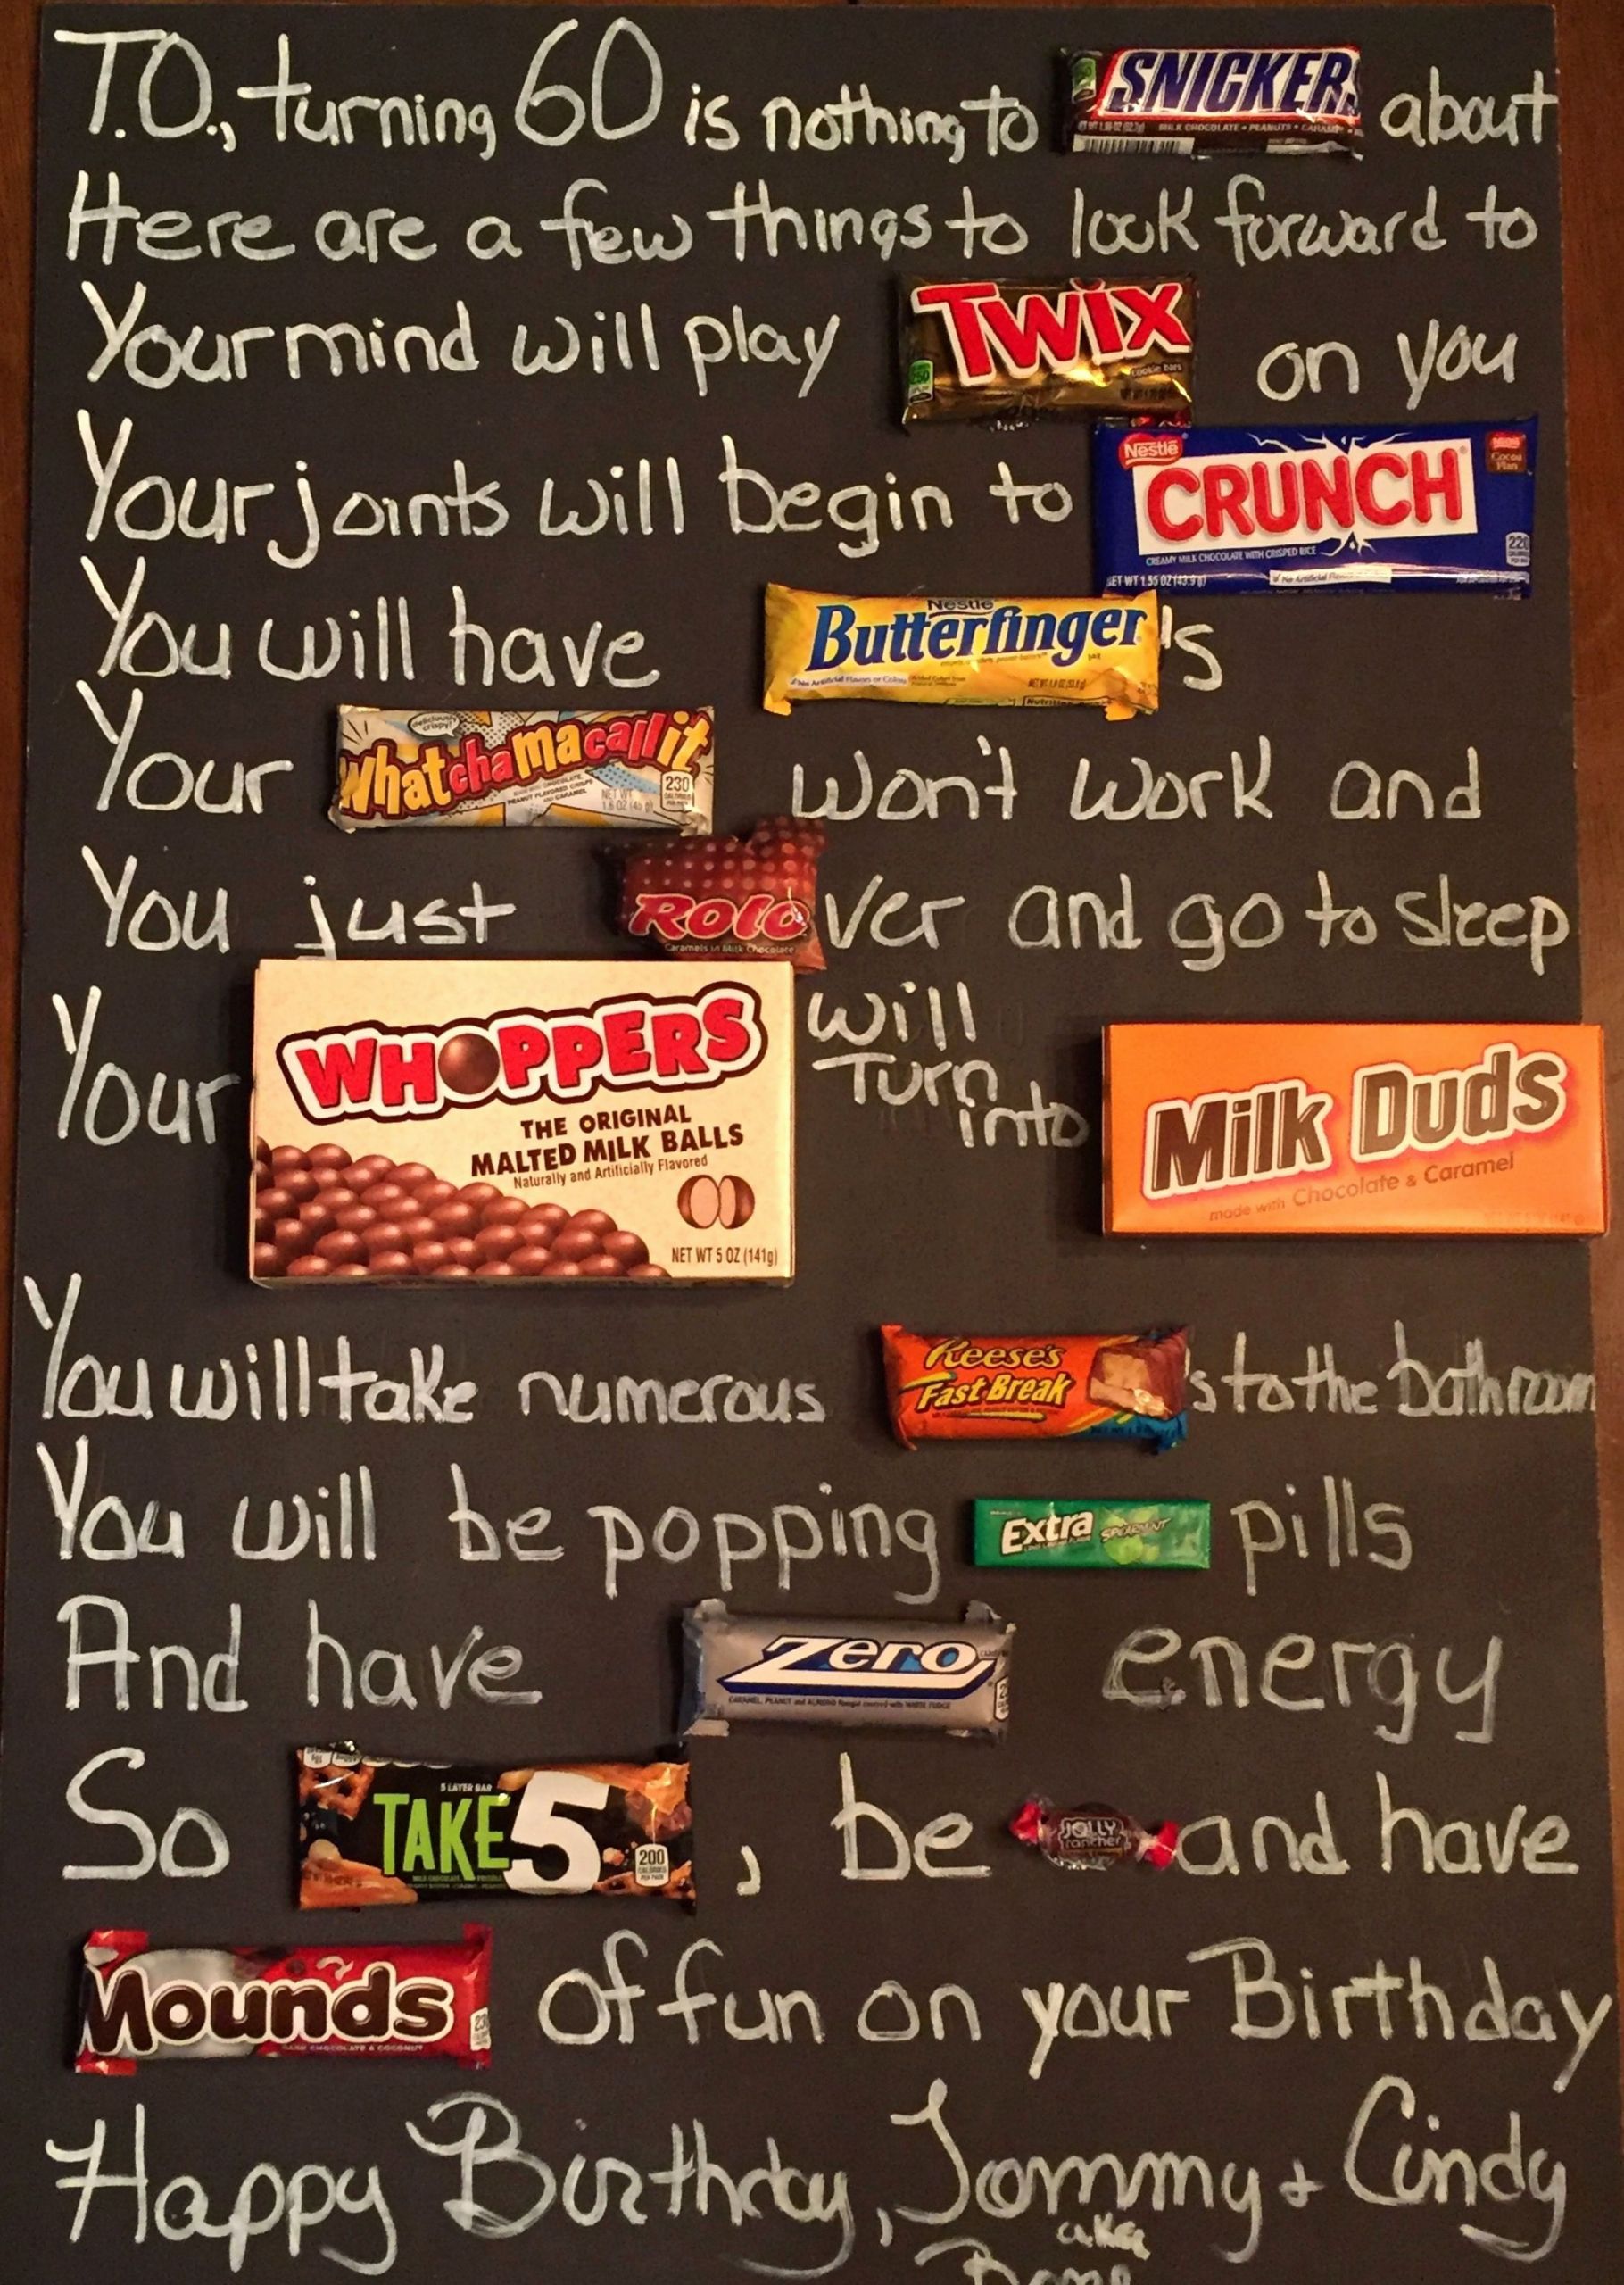 Funny 50th Birthday Poems
 Image result for funny 50th birthday poem with candy